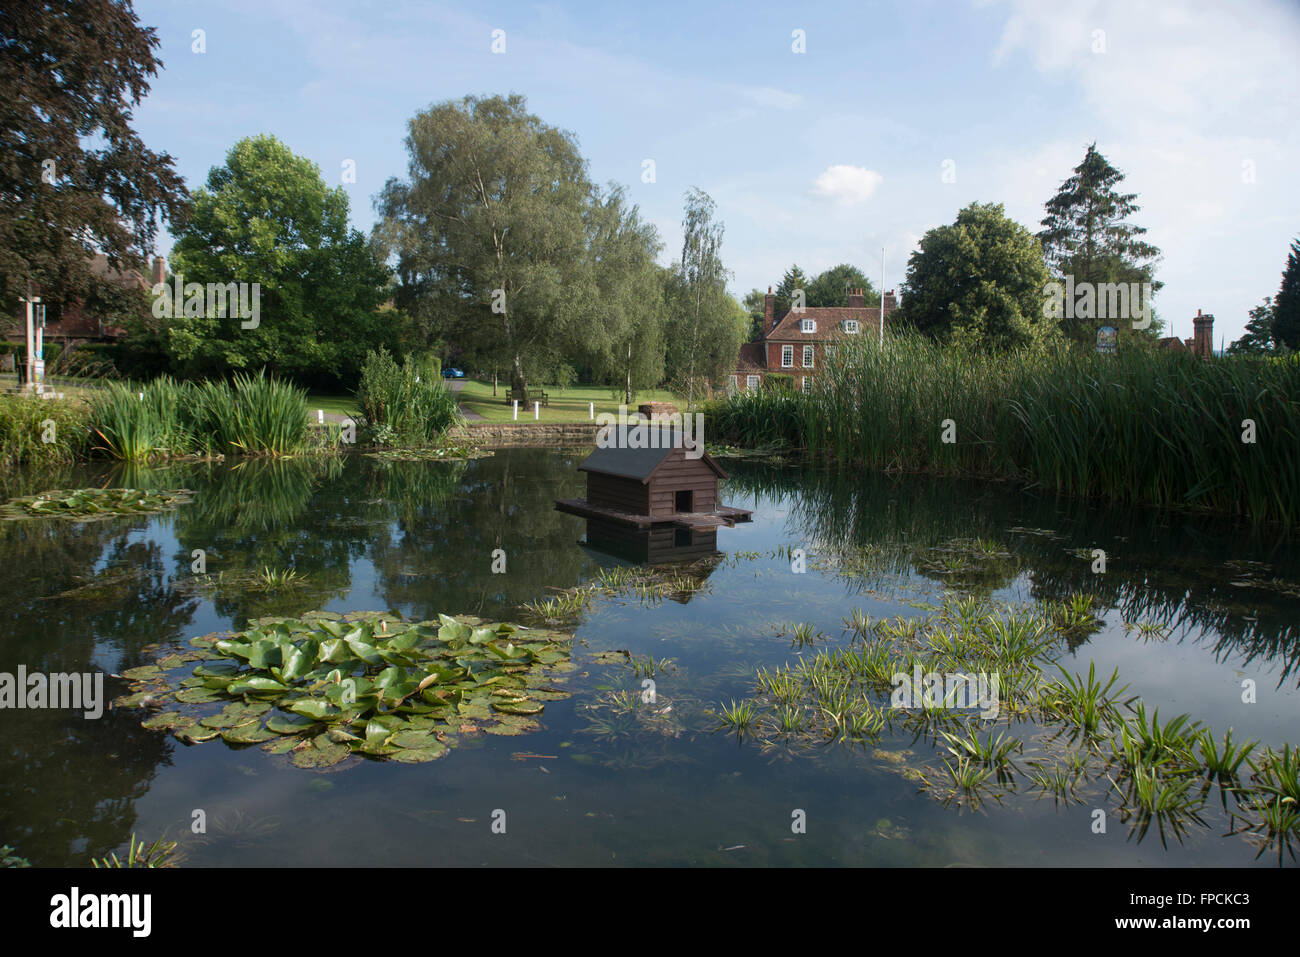 A view of the Grade II listed pond in Otford, Kent. Stock Photo